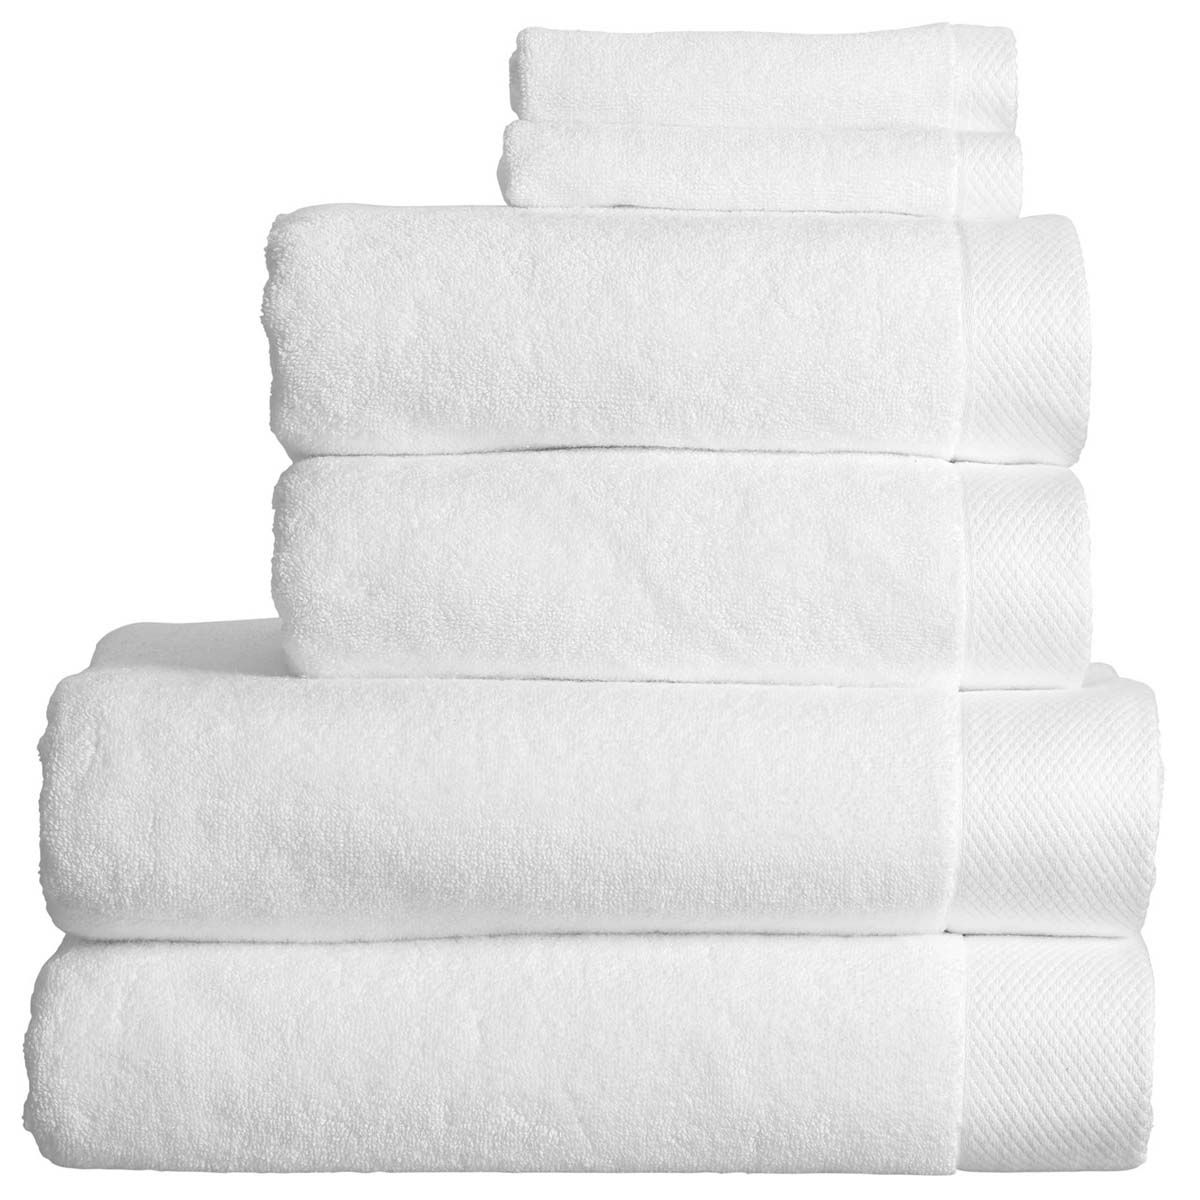 https://www.luxhom.shop/wp-content/uploads/1687/59/only-22-80-usd-for-christy-luxe-bath-towel-white-online-at-the-shop_0.jpg